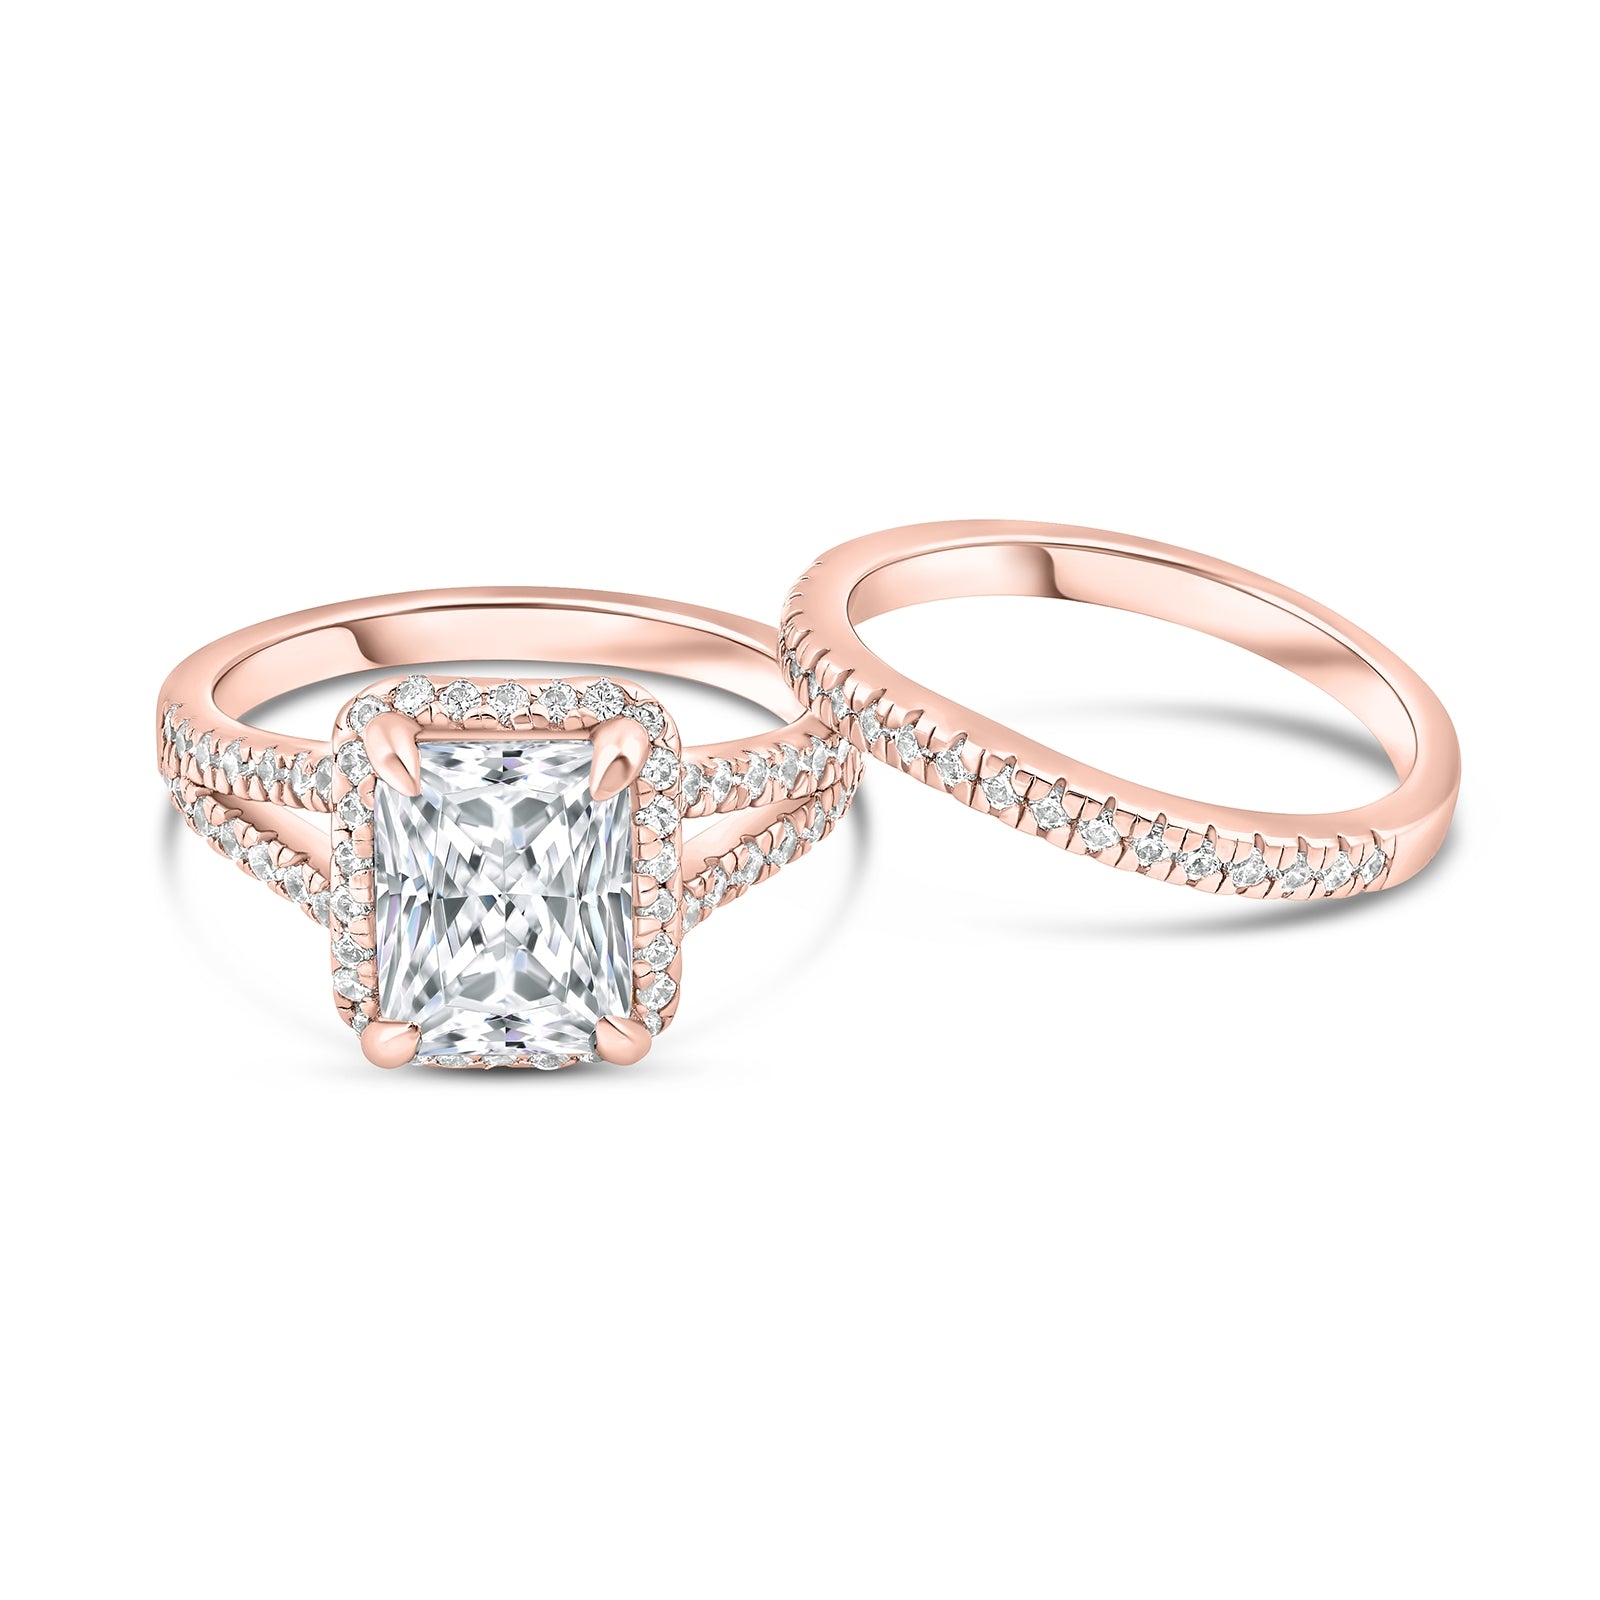 rose gold wedding ring set with a 3.5 carat radiant cut split shank engagement ring and a half eternity band